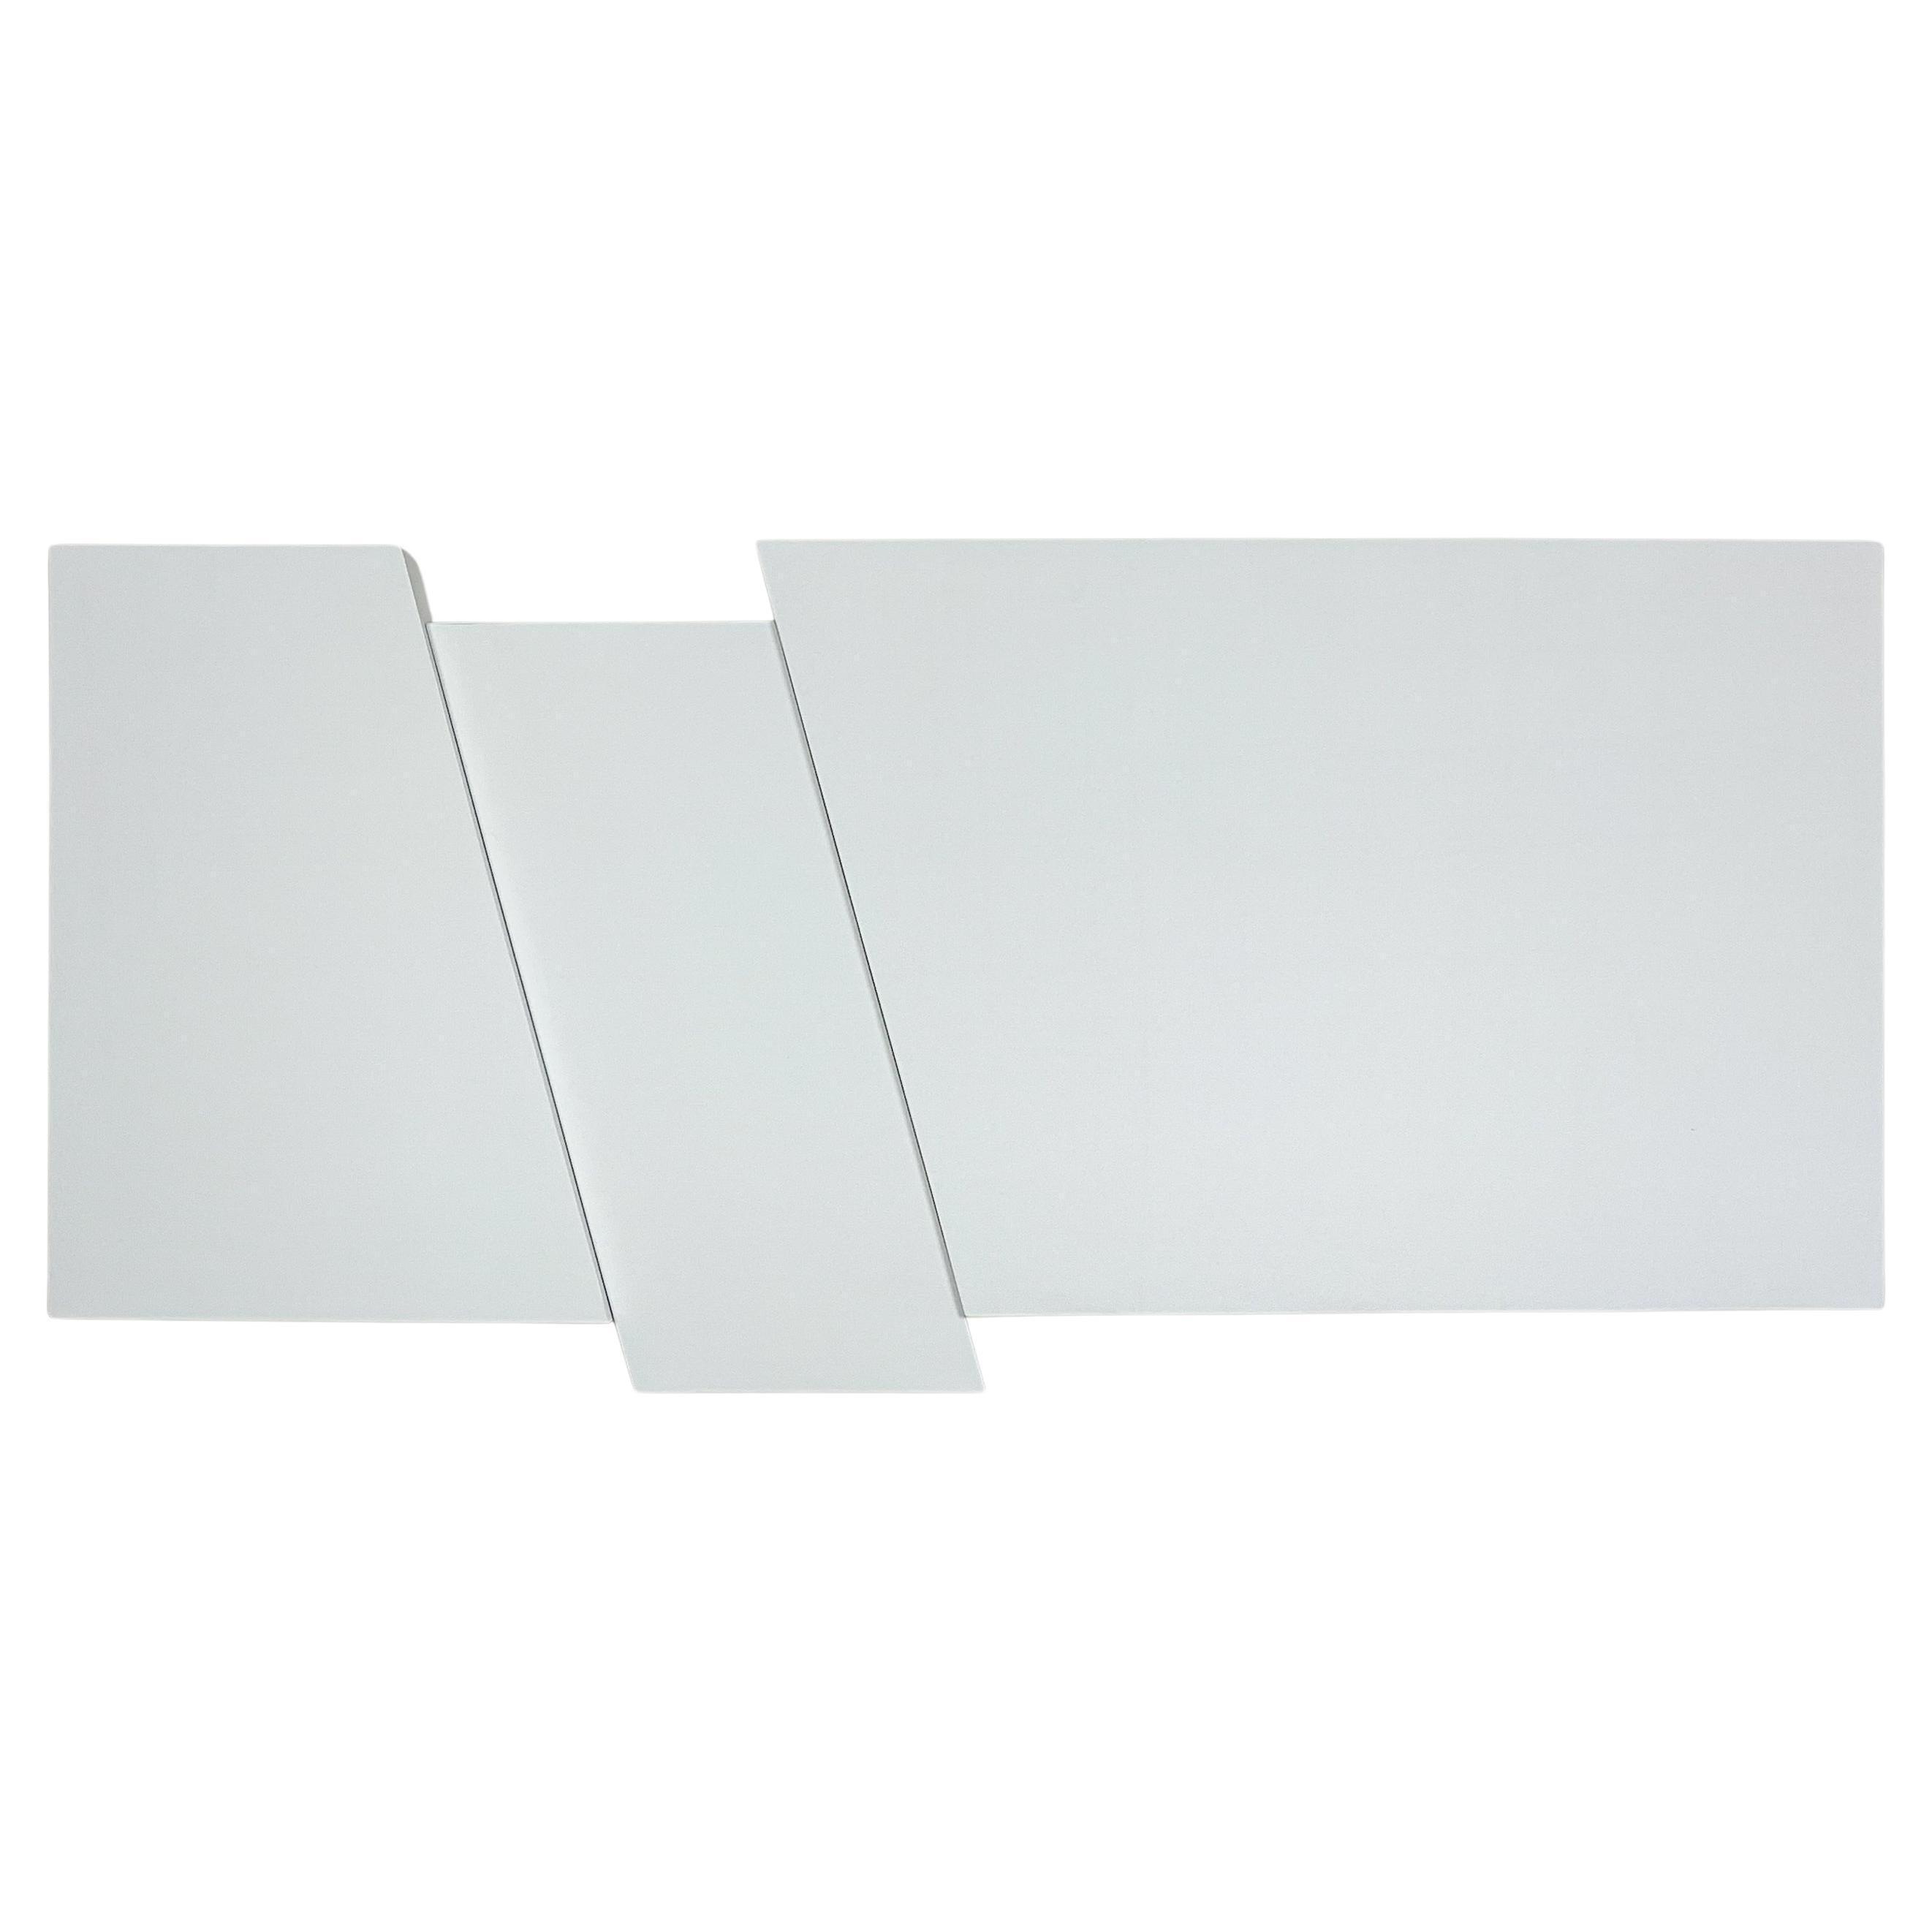 Original Minimalist wall Relief by Lars-Erik Falk, Relief in White No. 63, 1981 For Sale